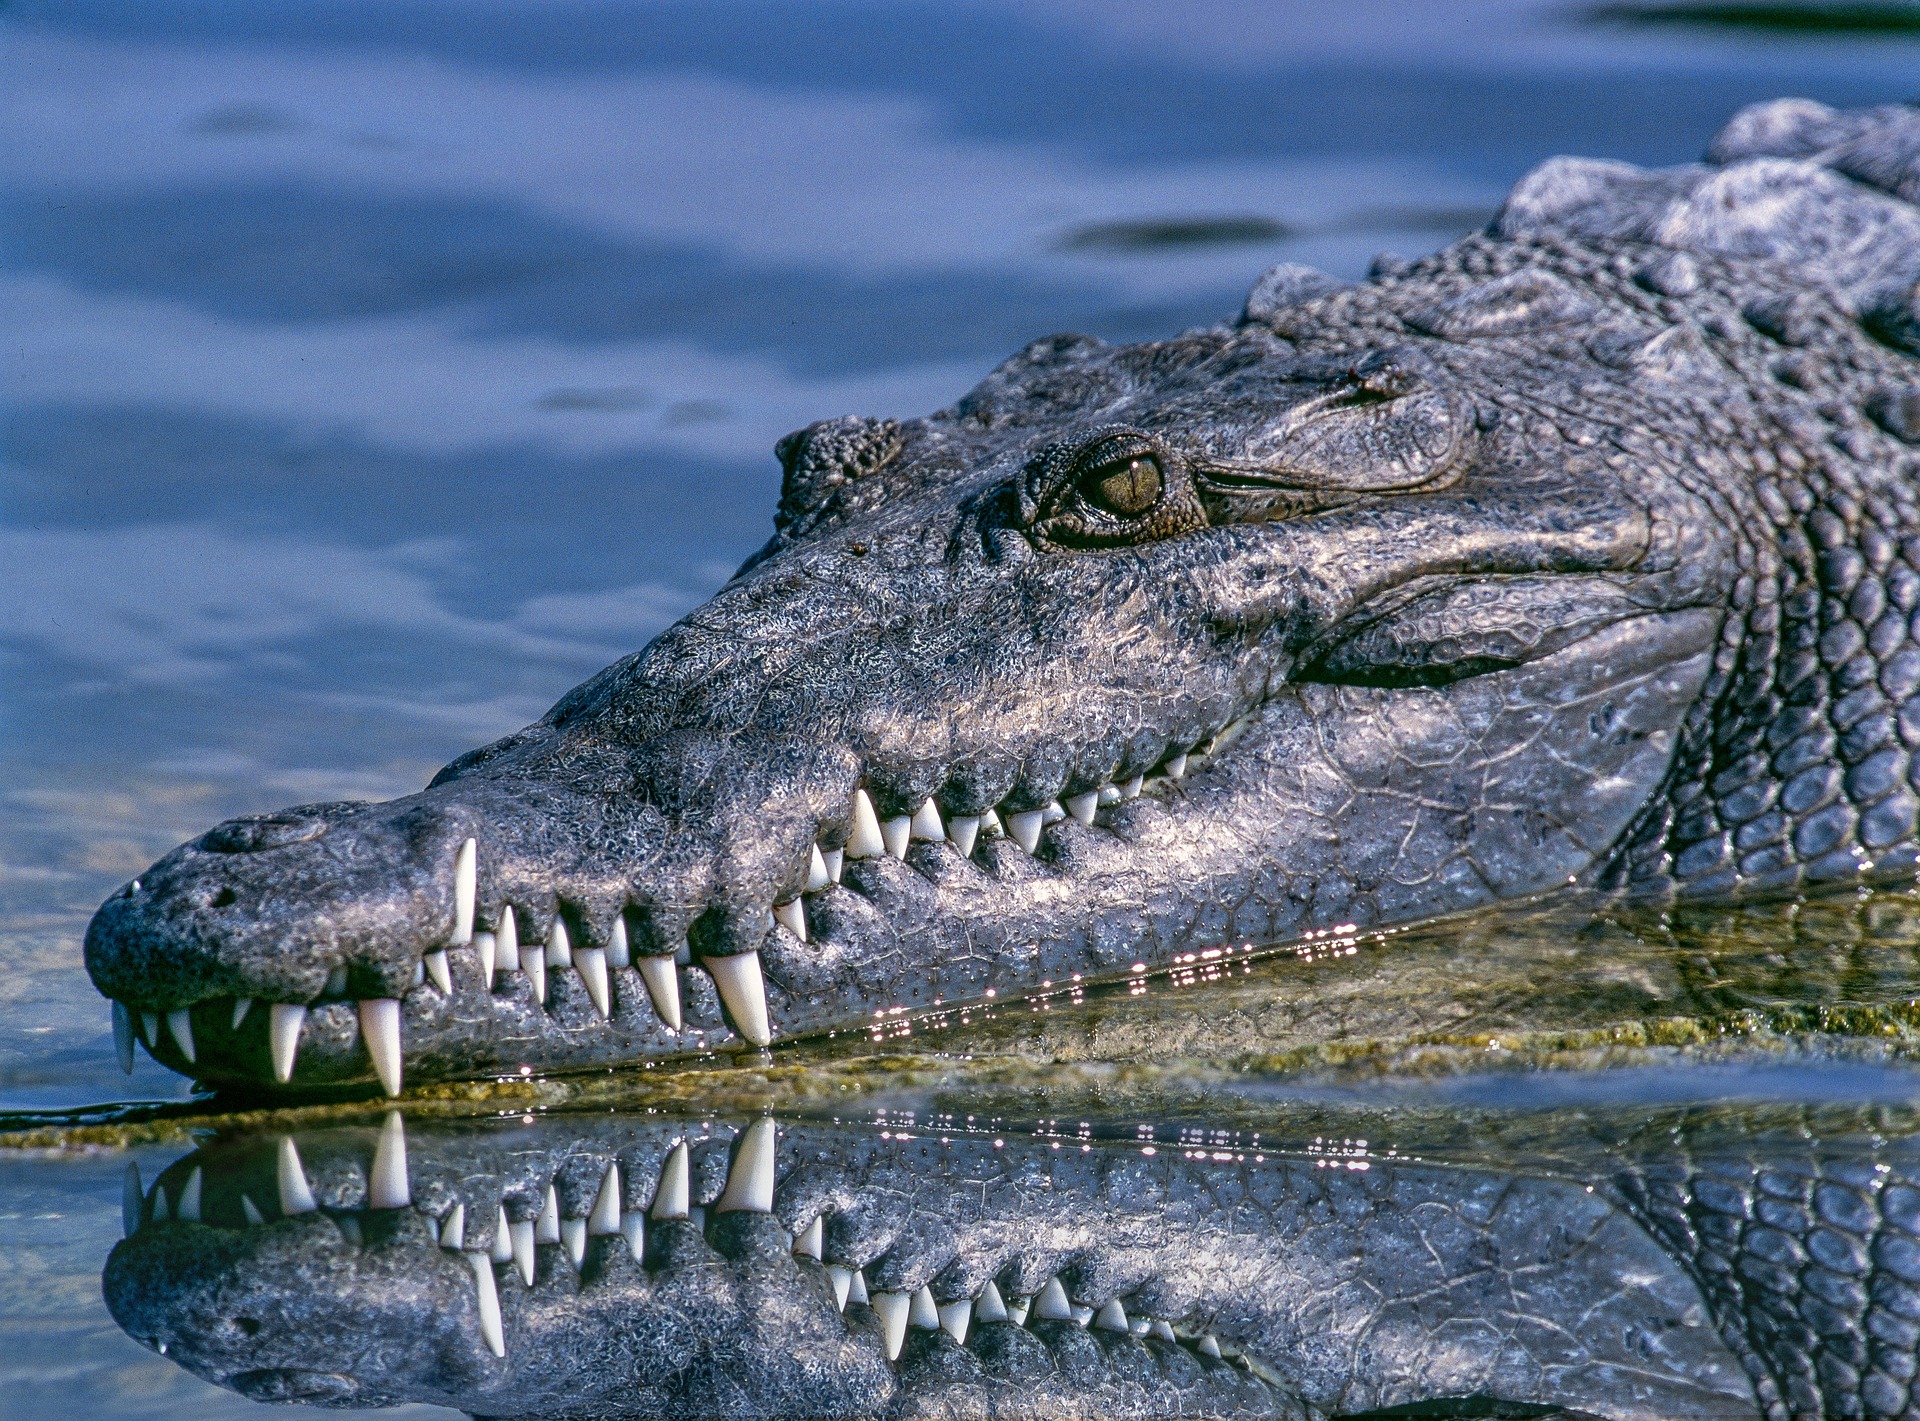 Just a 13-foot crocodile casually eating a shark on the beach like it’s no big deal – BroBible